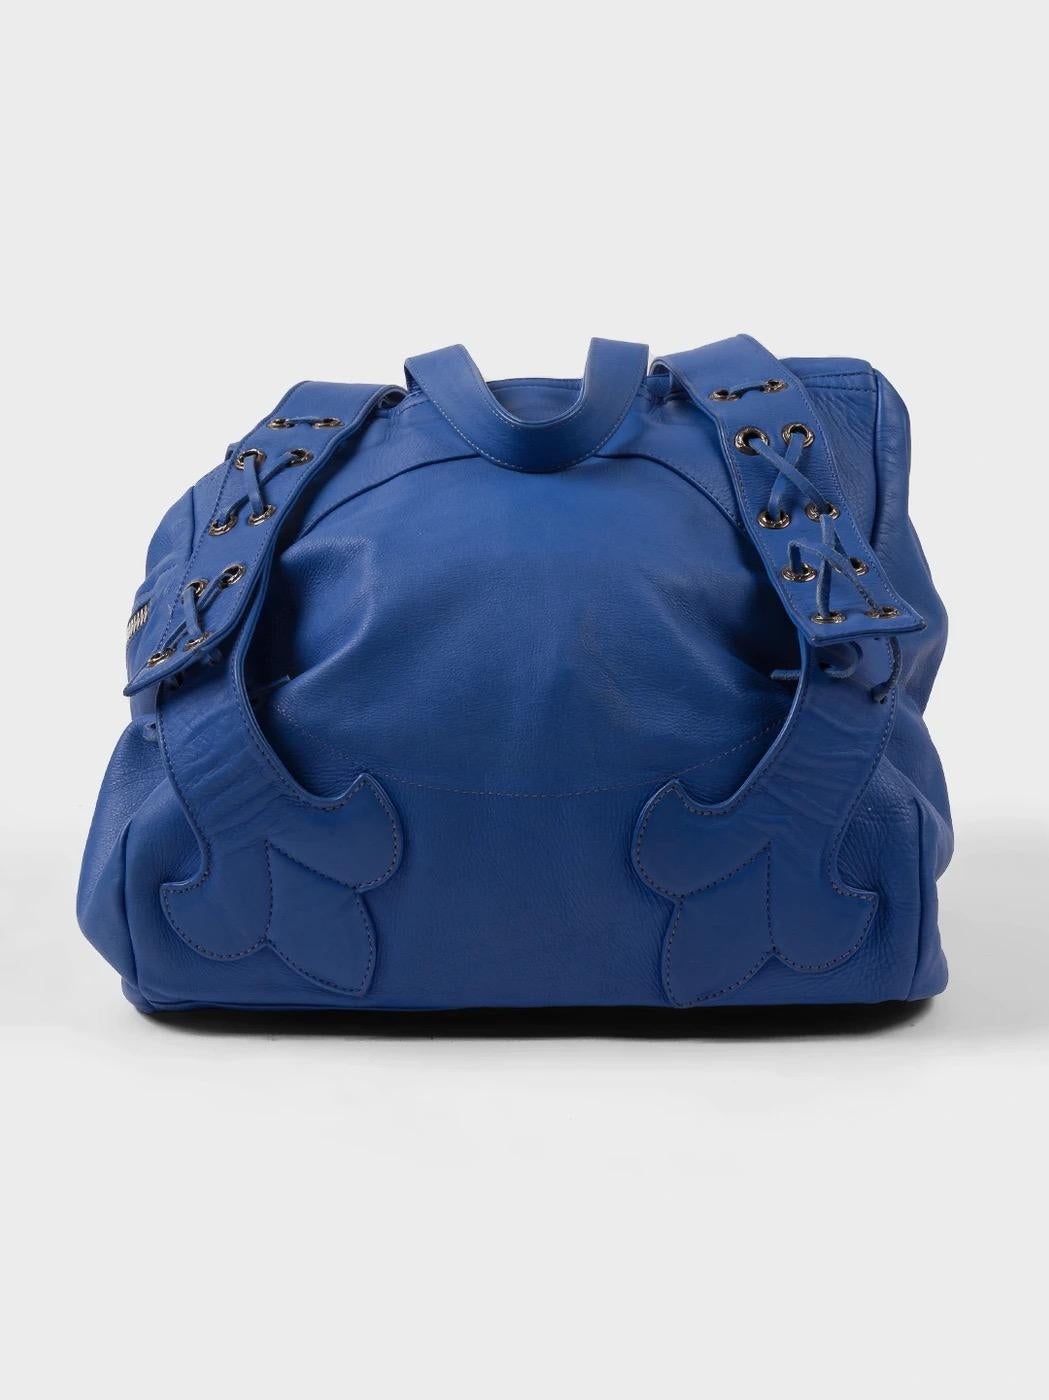 Here is an incredible leather bag/backpack from Chrome Hearts in a stunning blue colorway. This bag also features large leather patches throughout the piece.